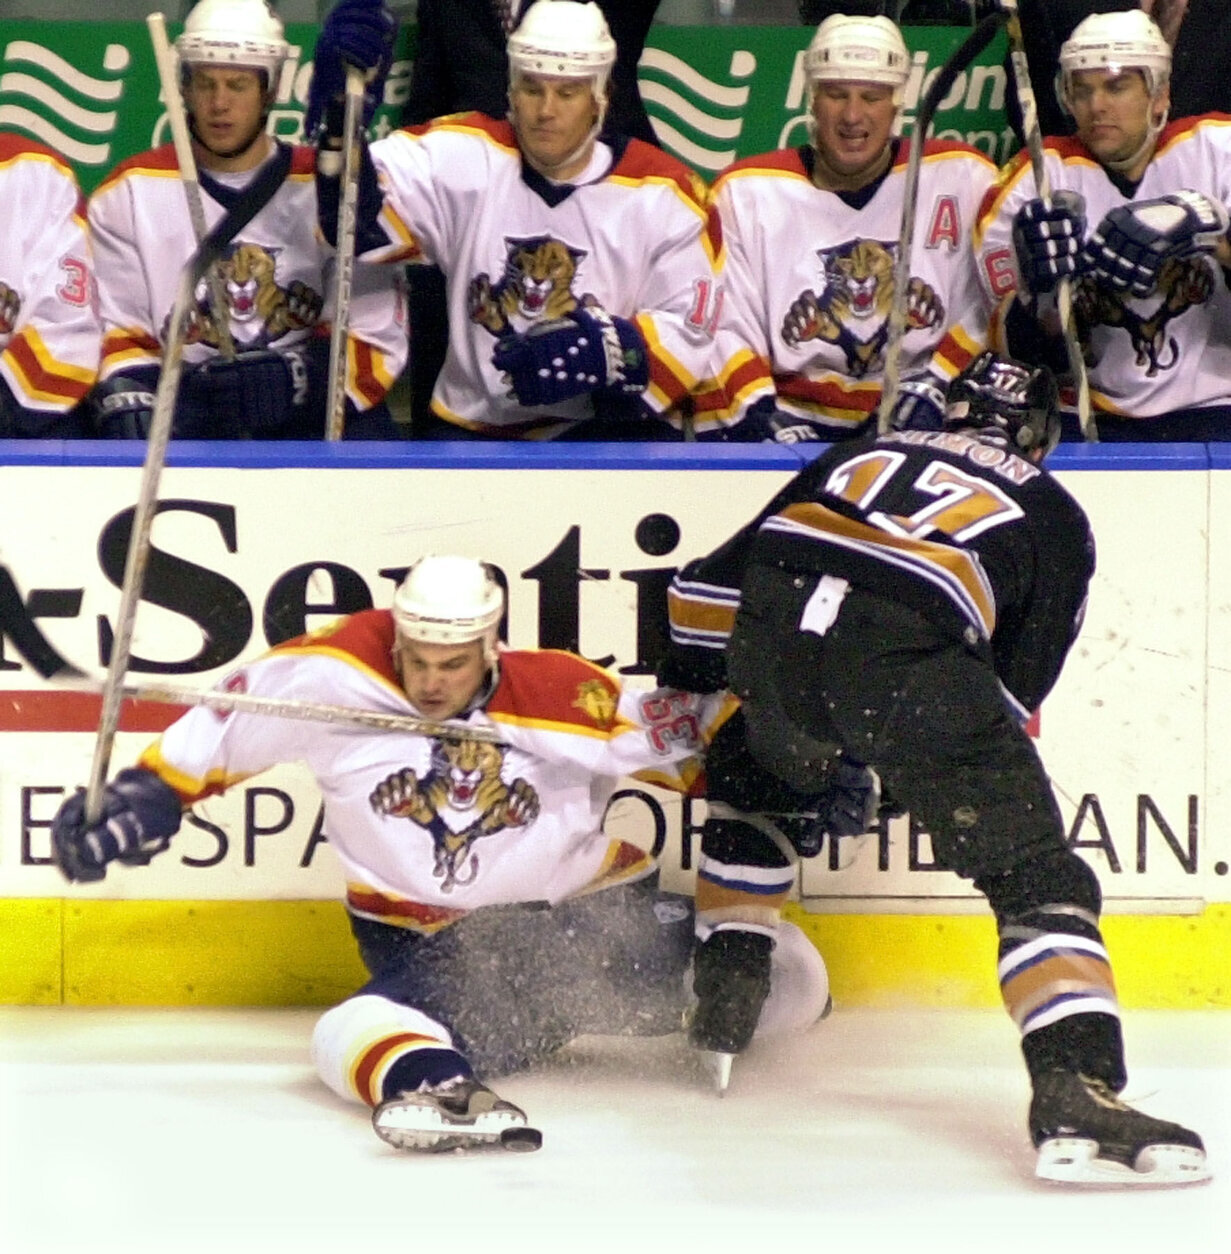 Florida Panthers' Ivan Novoseltsev, left, of Russia, is checked to the ice by Washington Capitals' Chris Simon (17) during the first period Wednesday, Dec. 19, 2001, in Sunrise, Fla. (AP Photo/Tony Gutierrez)